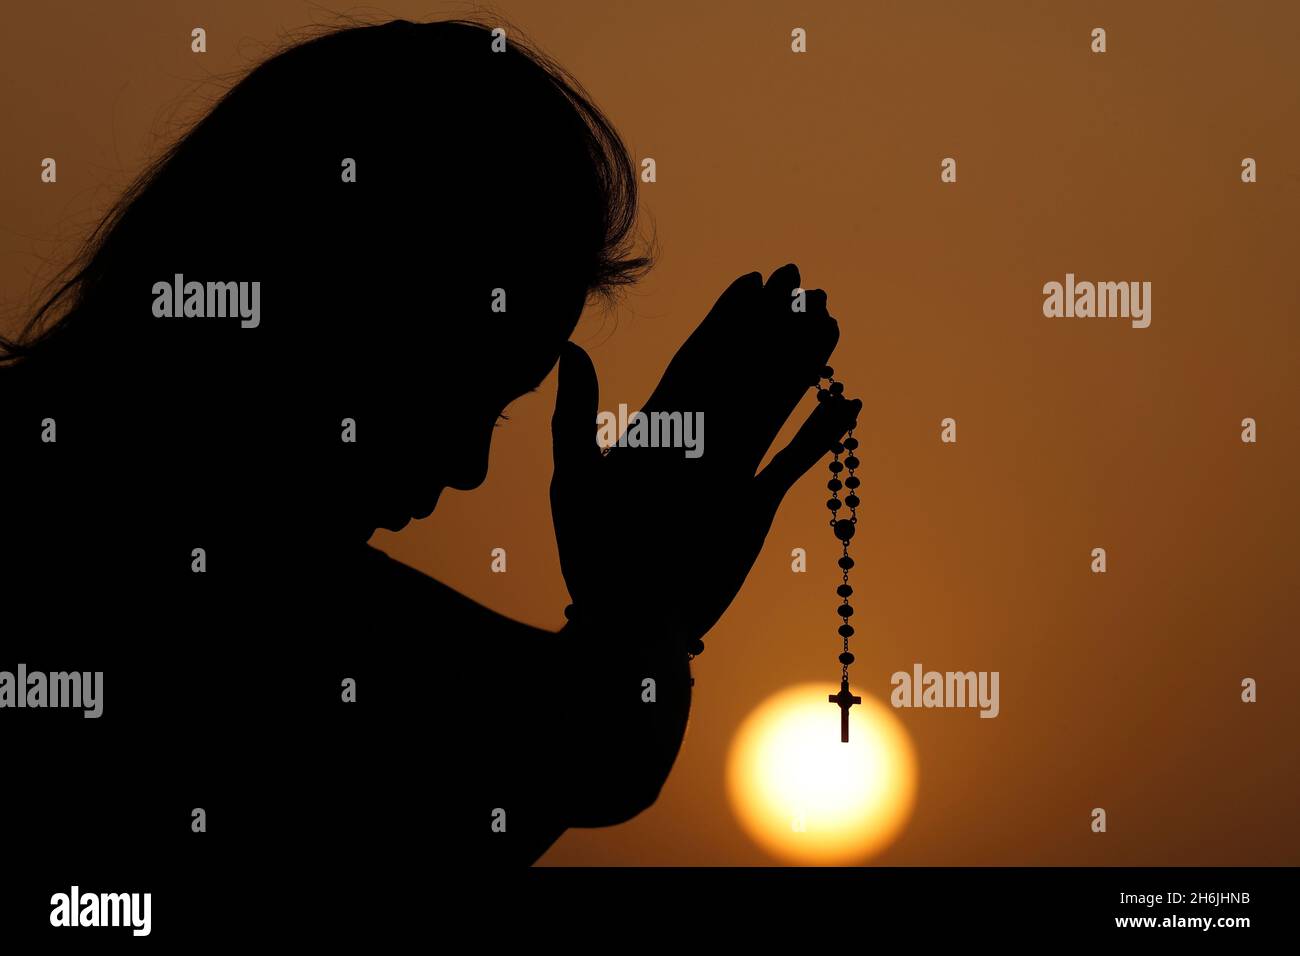 Silhouette of faithful woman praying with rosary beads at sunset as concept for religion, faith, prayer and spirituality, Dubai, United Arab Emirates Stock Photo